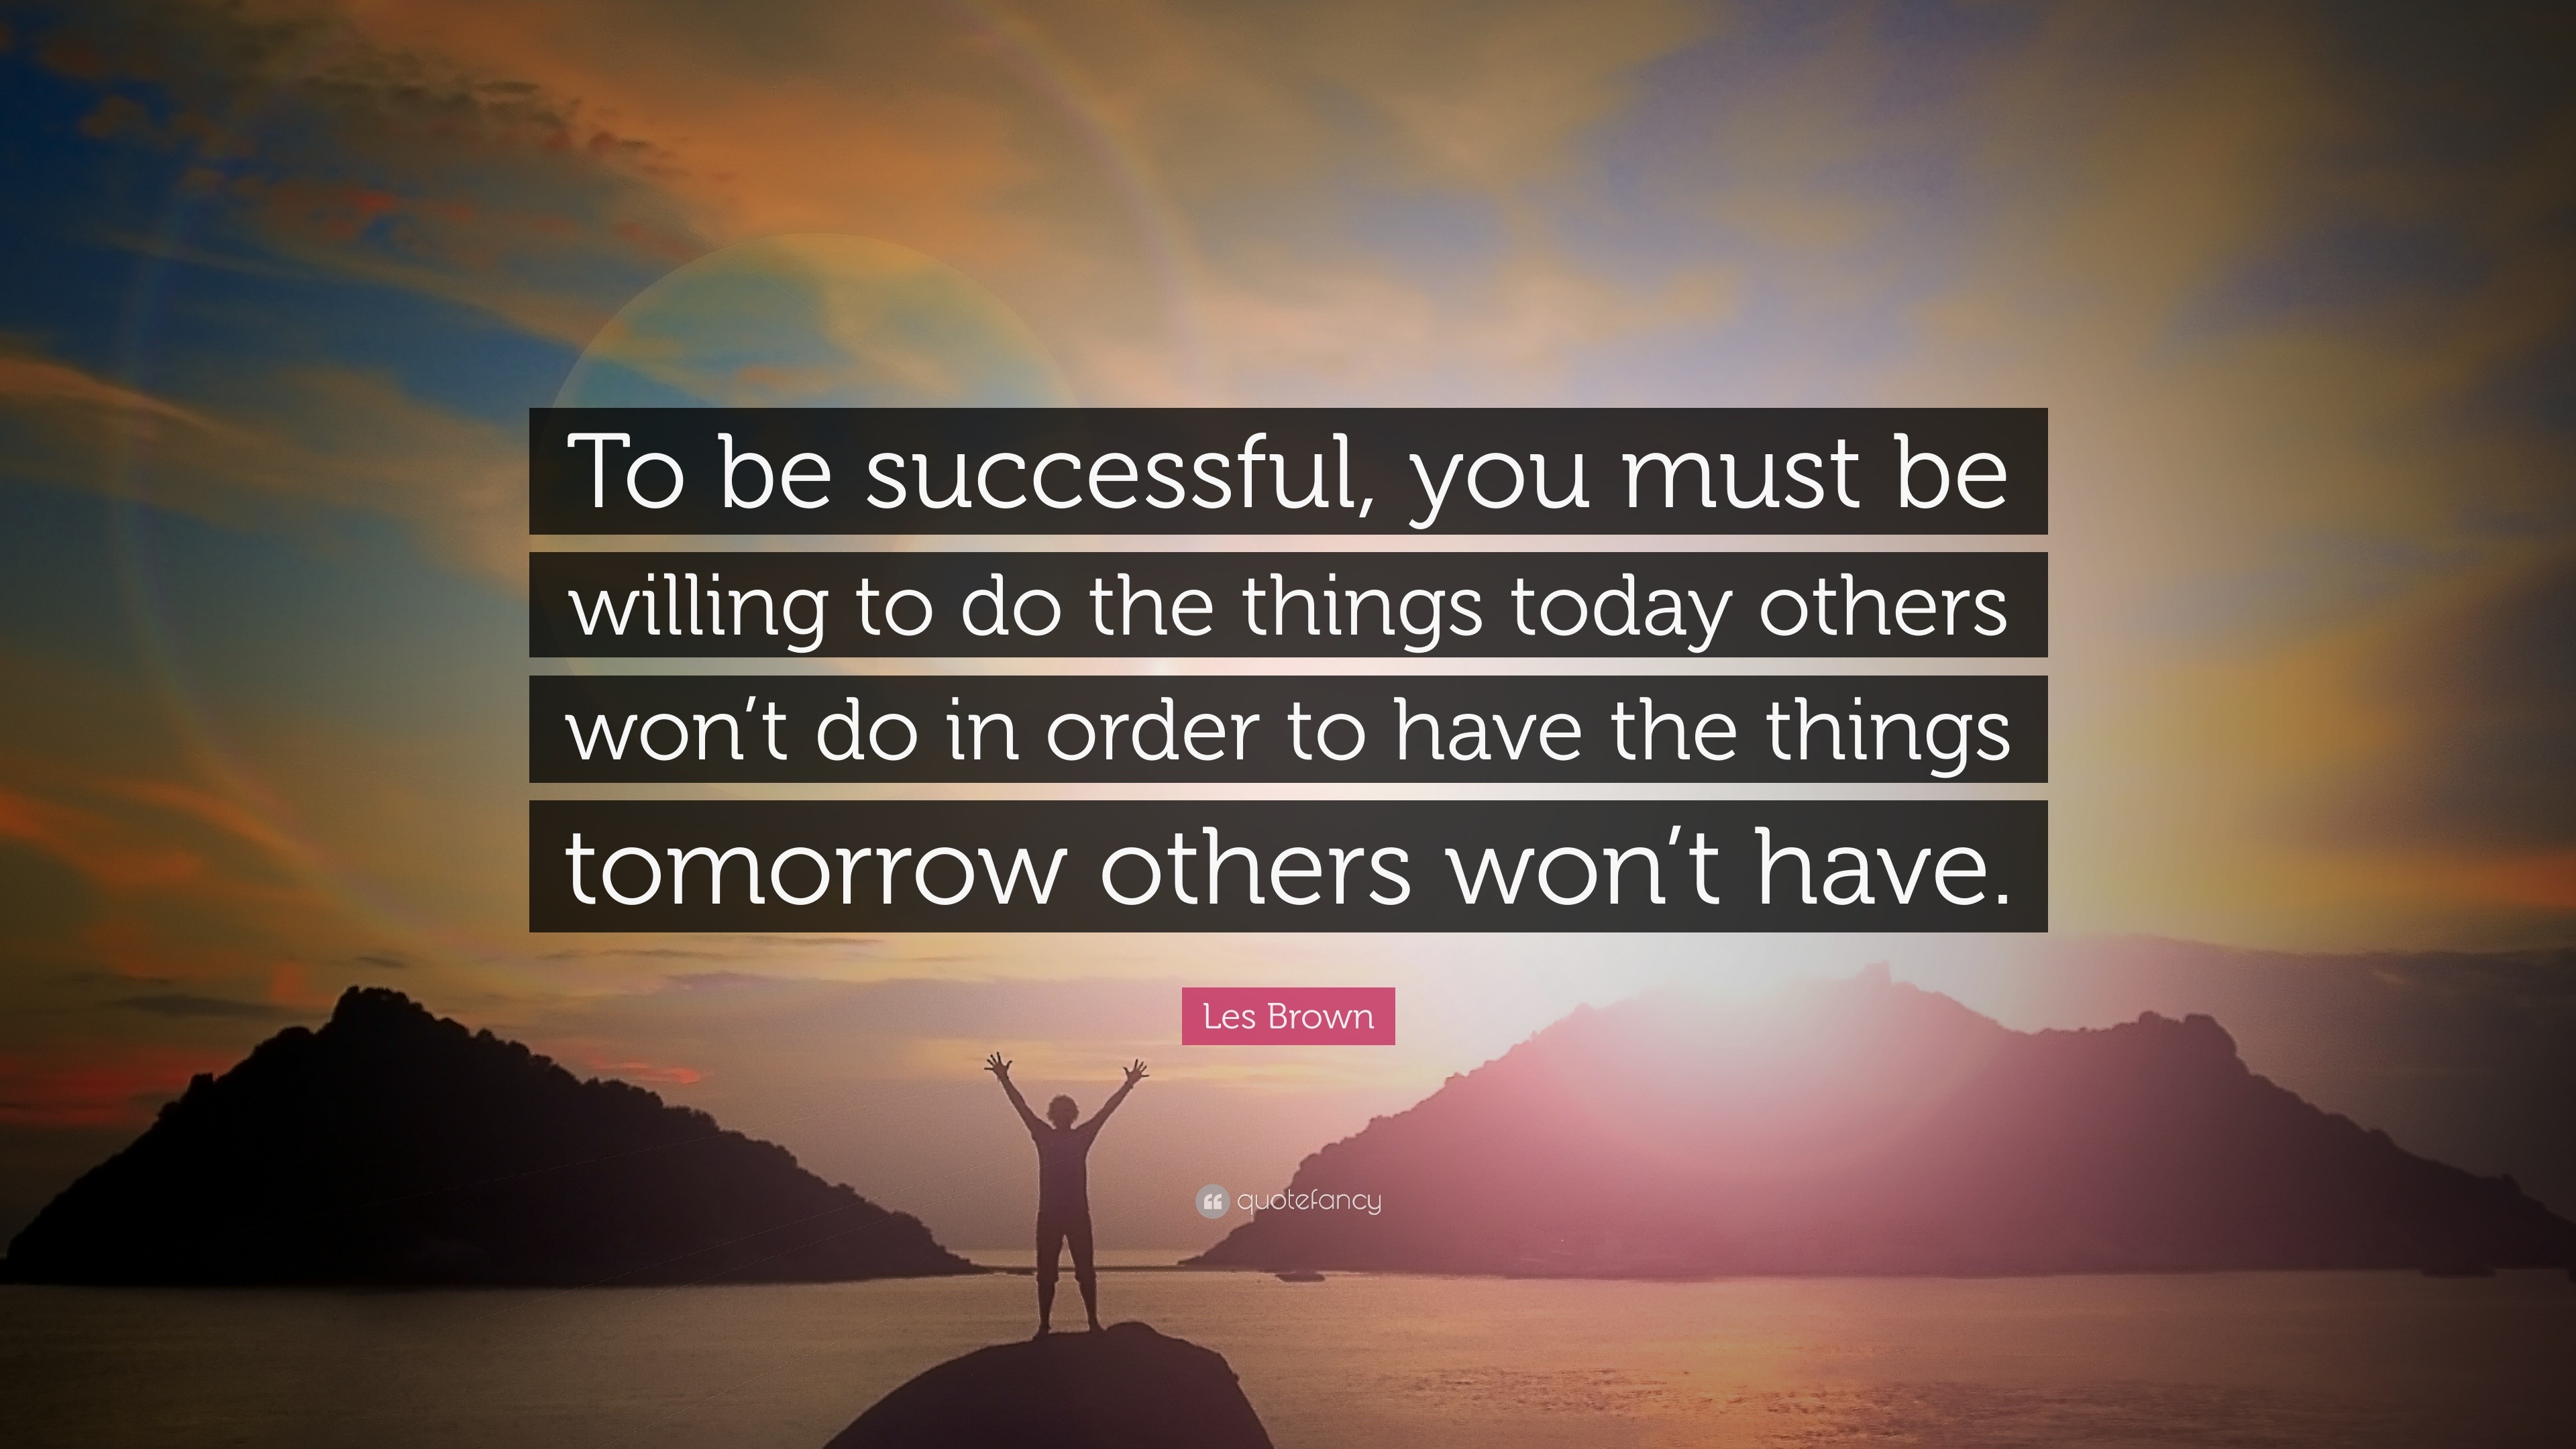 Les Brown Quote: “To be successful, you must be willing to do the